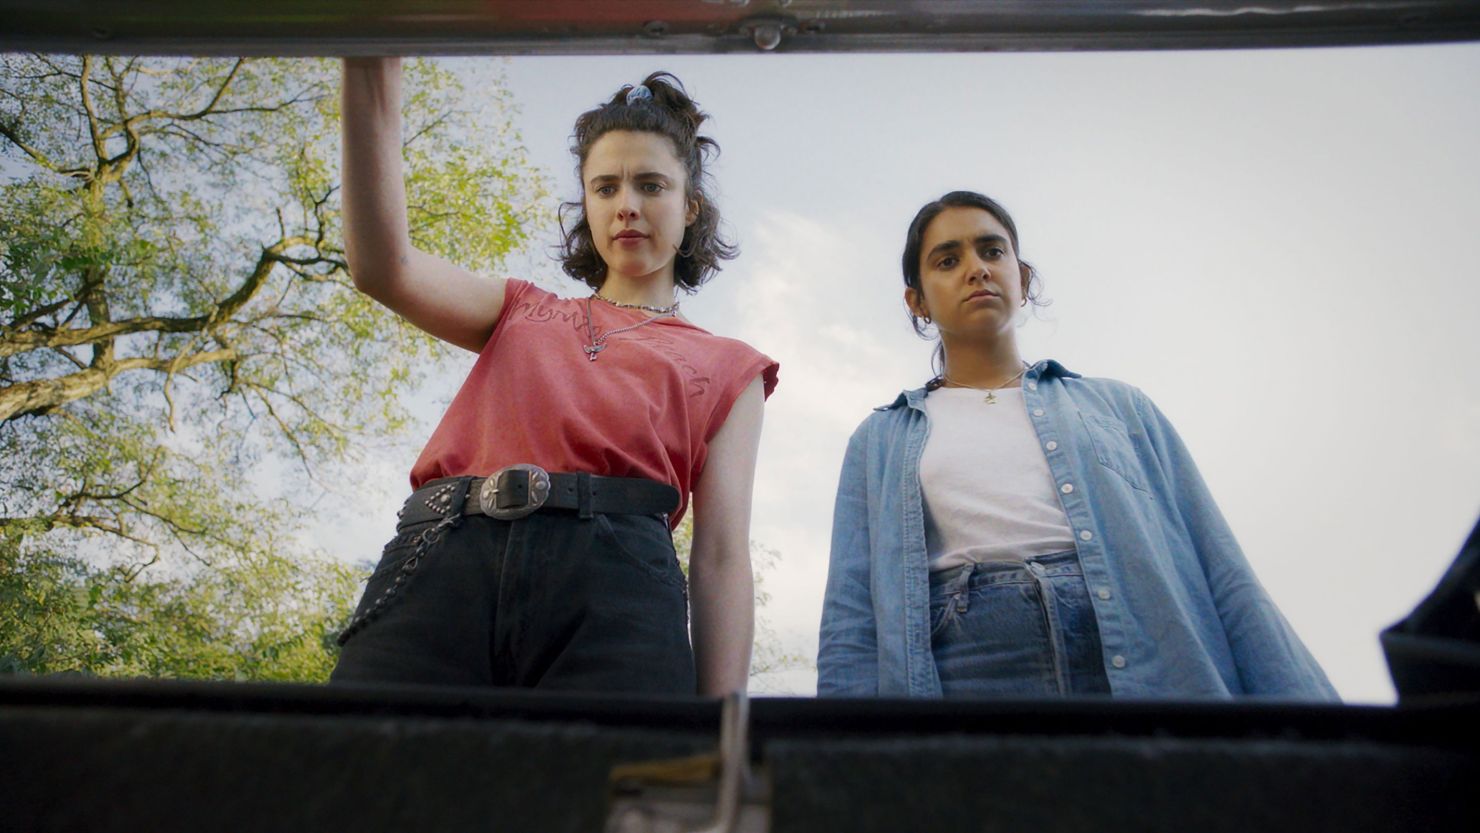 Ethan Coen's and Tricia Cooke's "Drive-Away Dolls" follows Jamie, an uninhibited free spirit bemoaning yet another breakup with a girlfriend, and her demure friend Marian who desperately needs to loosen up.